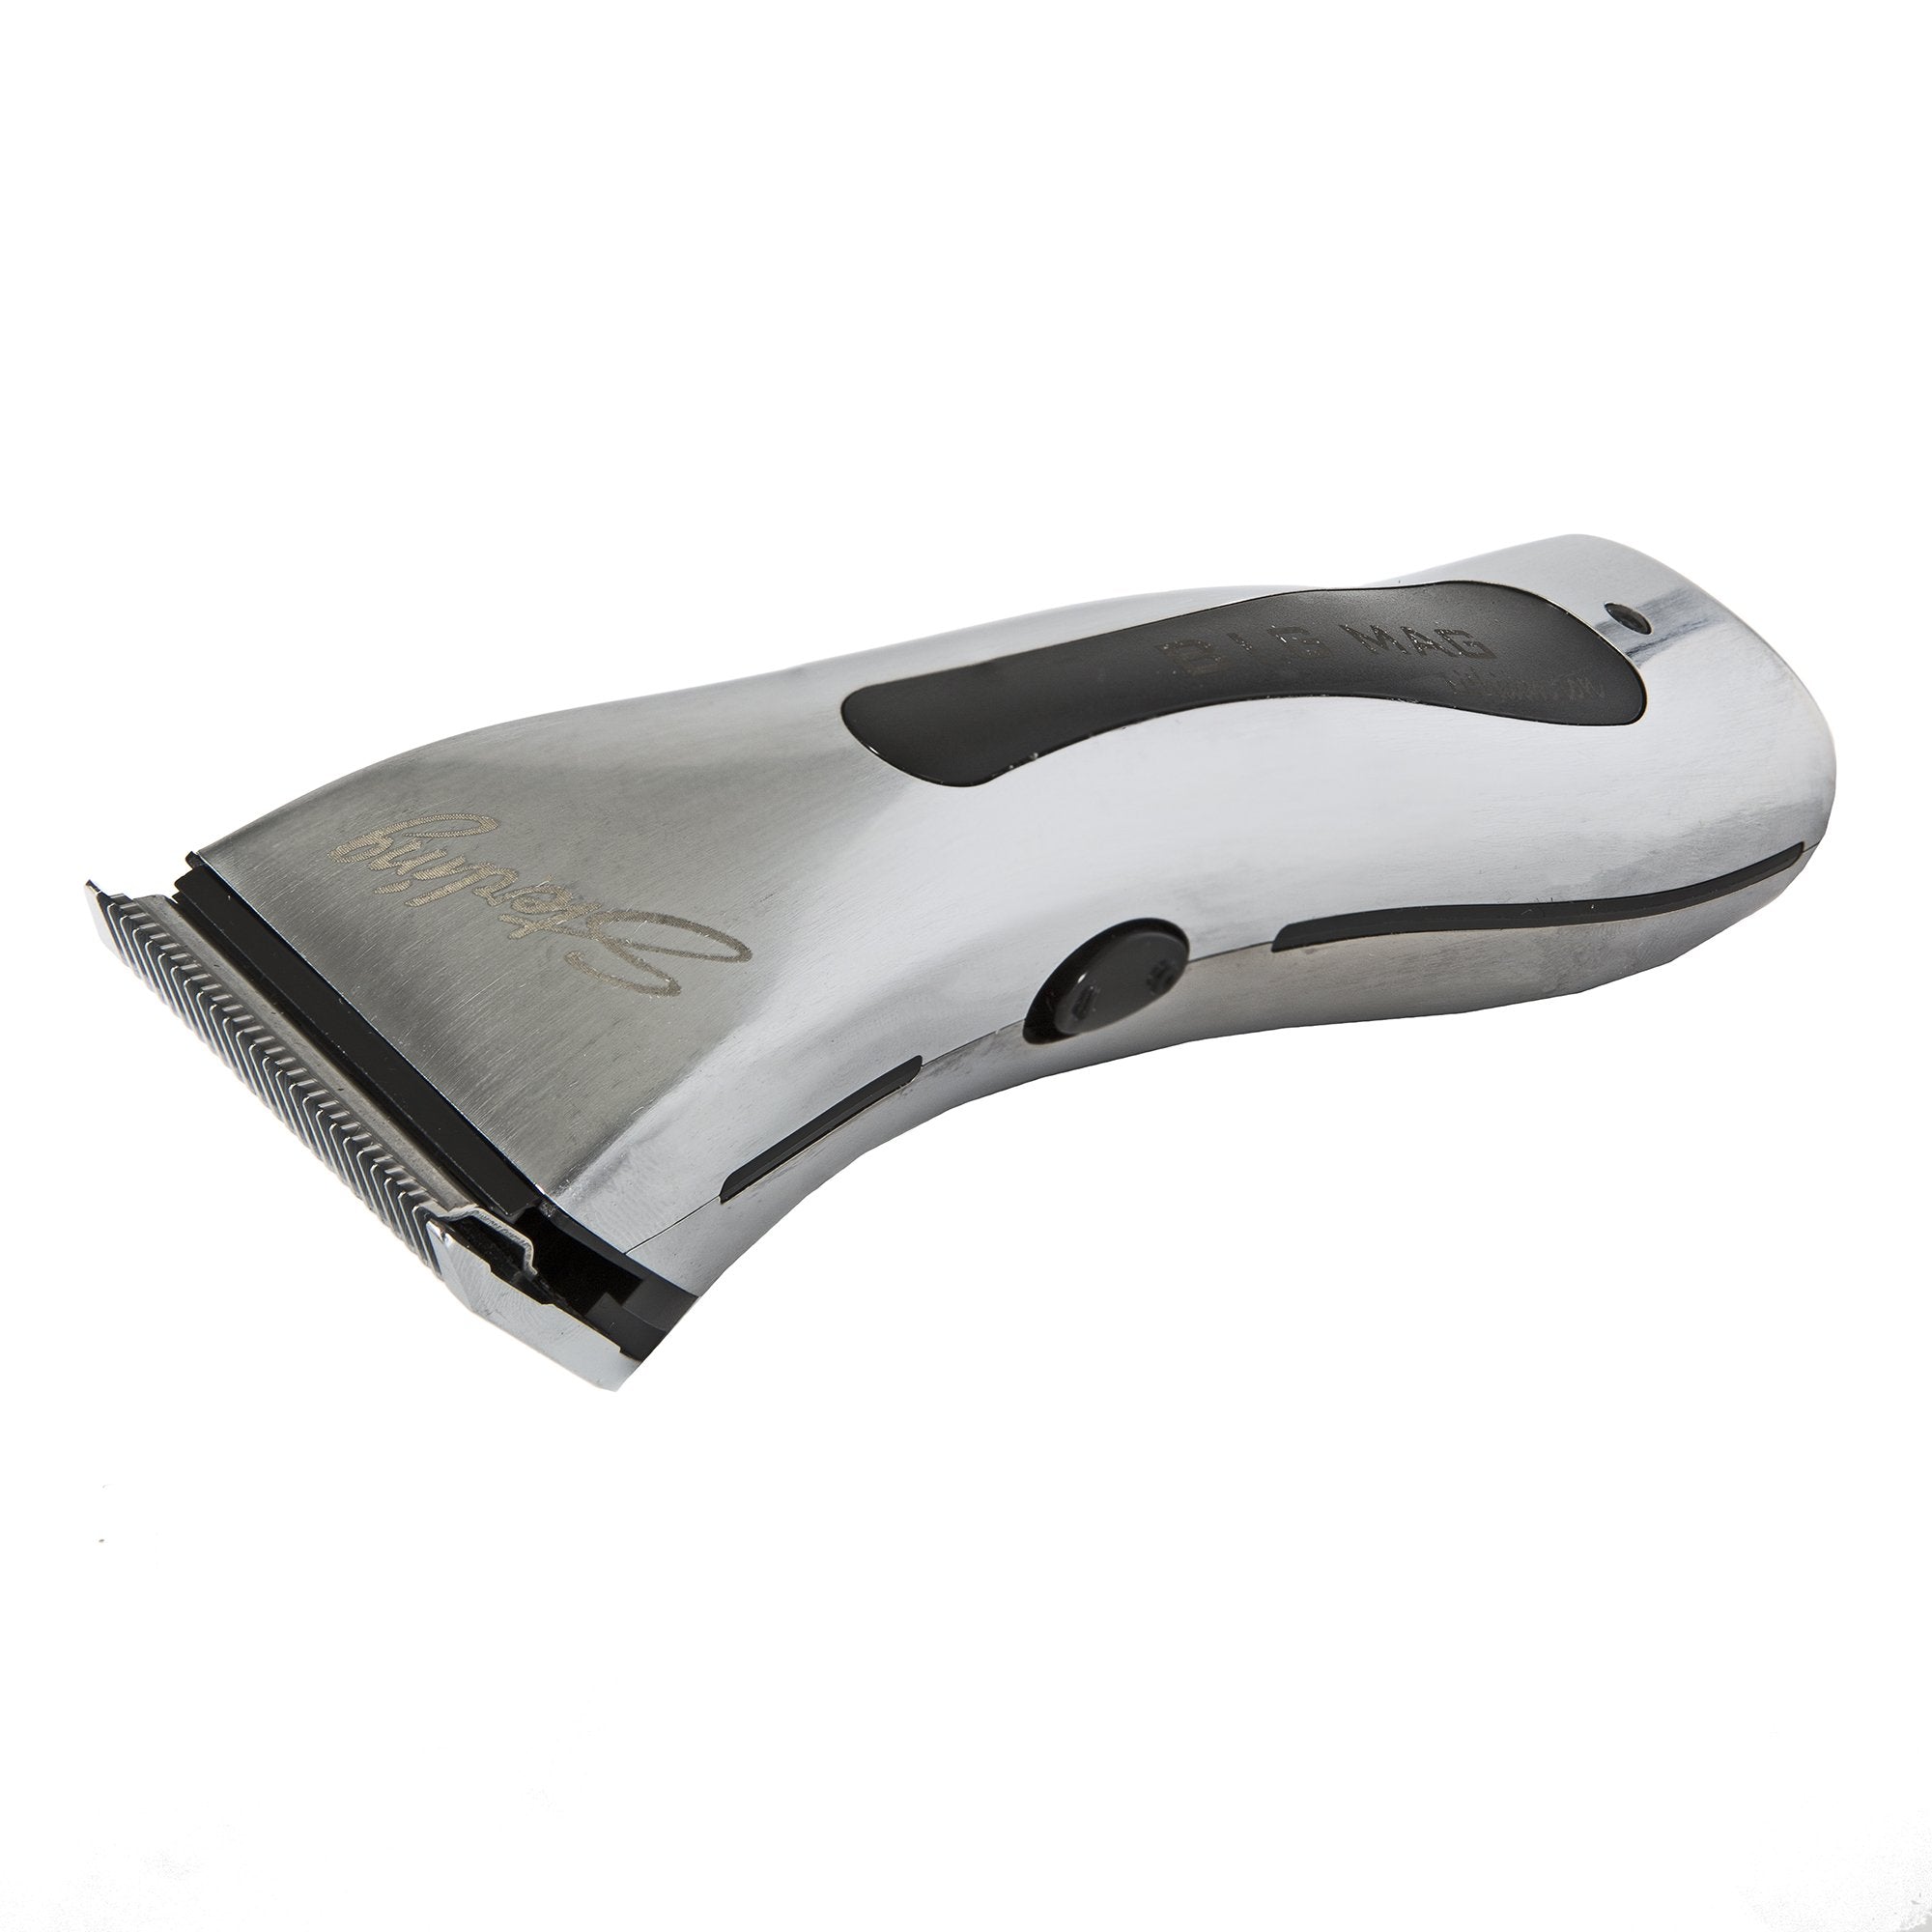 wahl mag clippers